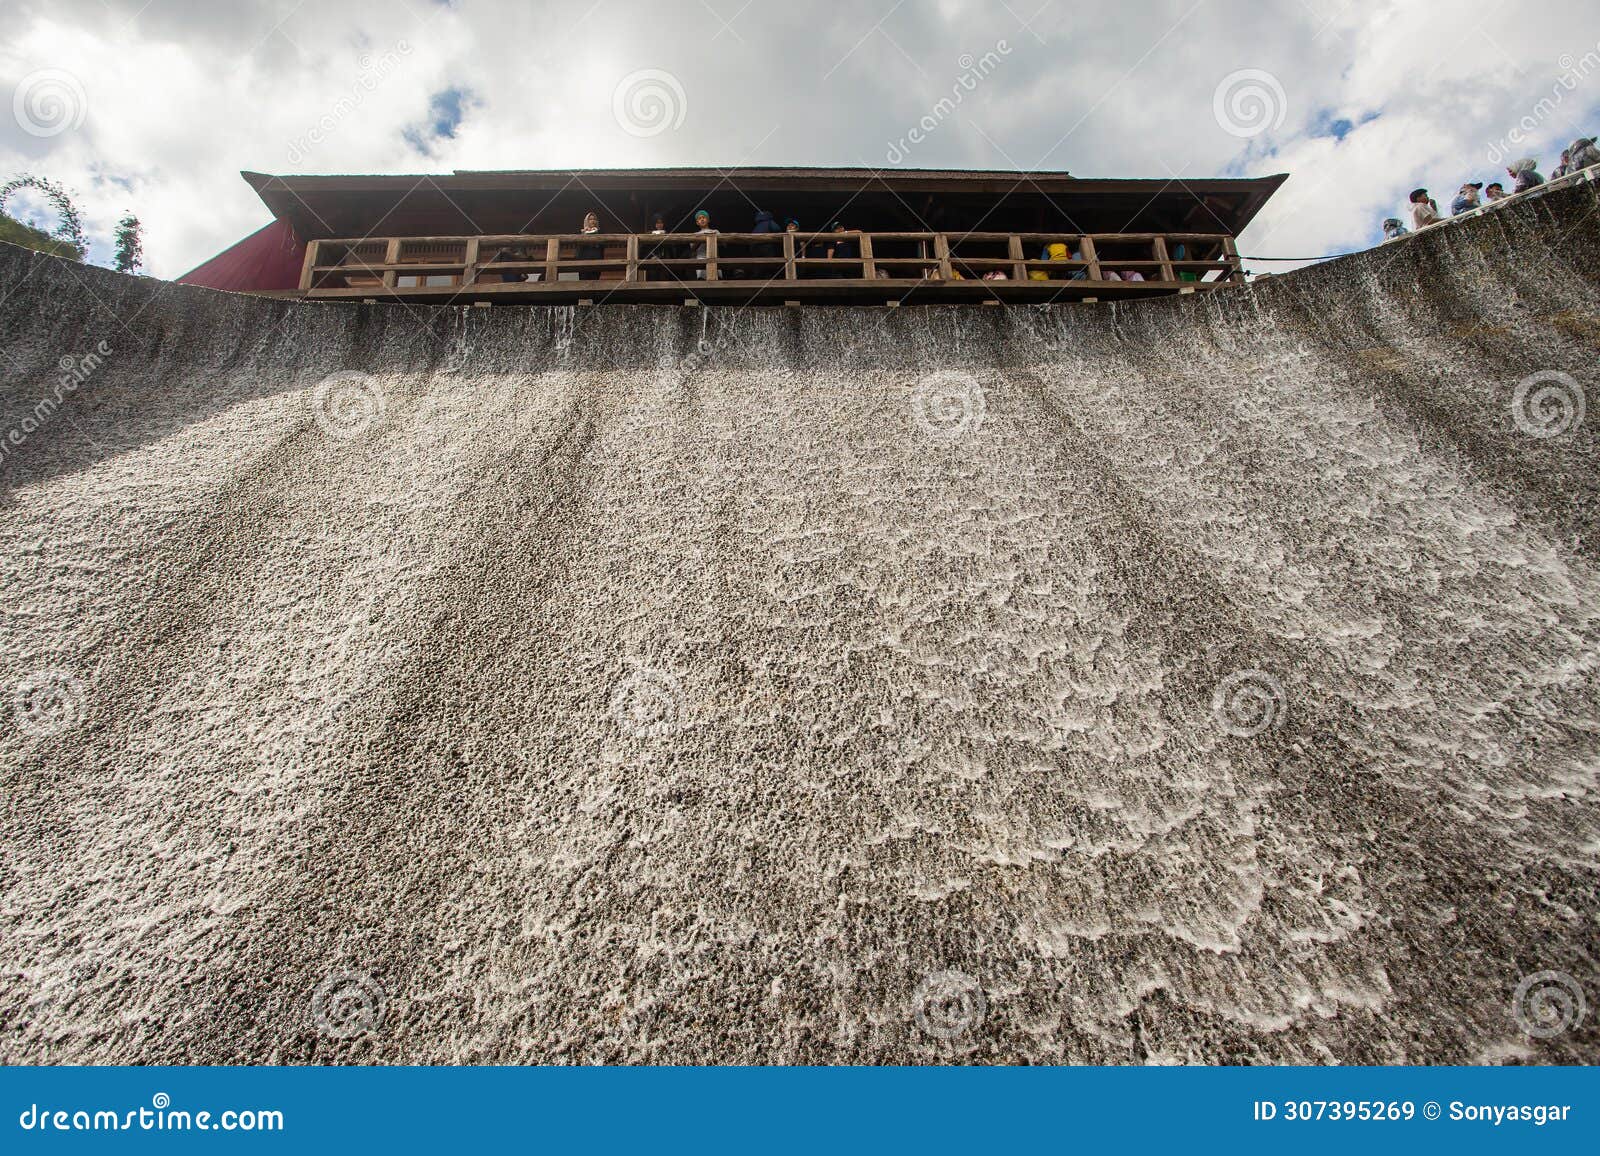 a new artificial waterfall tourist attraction in the dusun bambu tourist area in bandung, west java, indonesia.